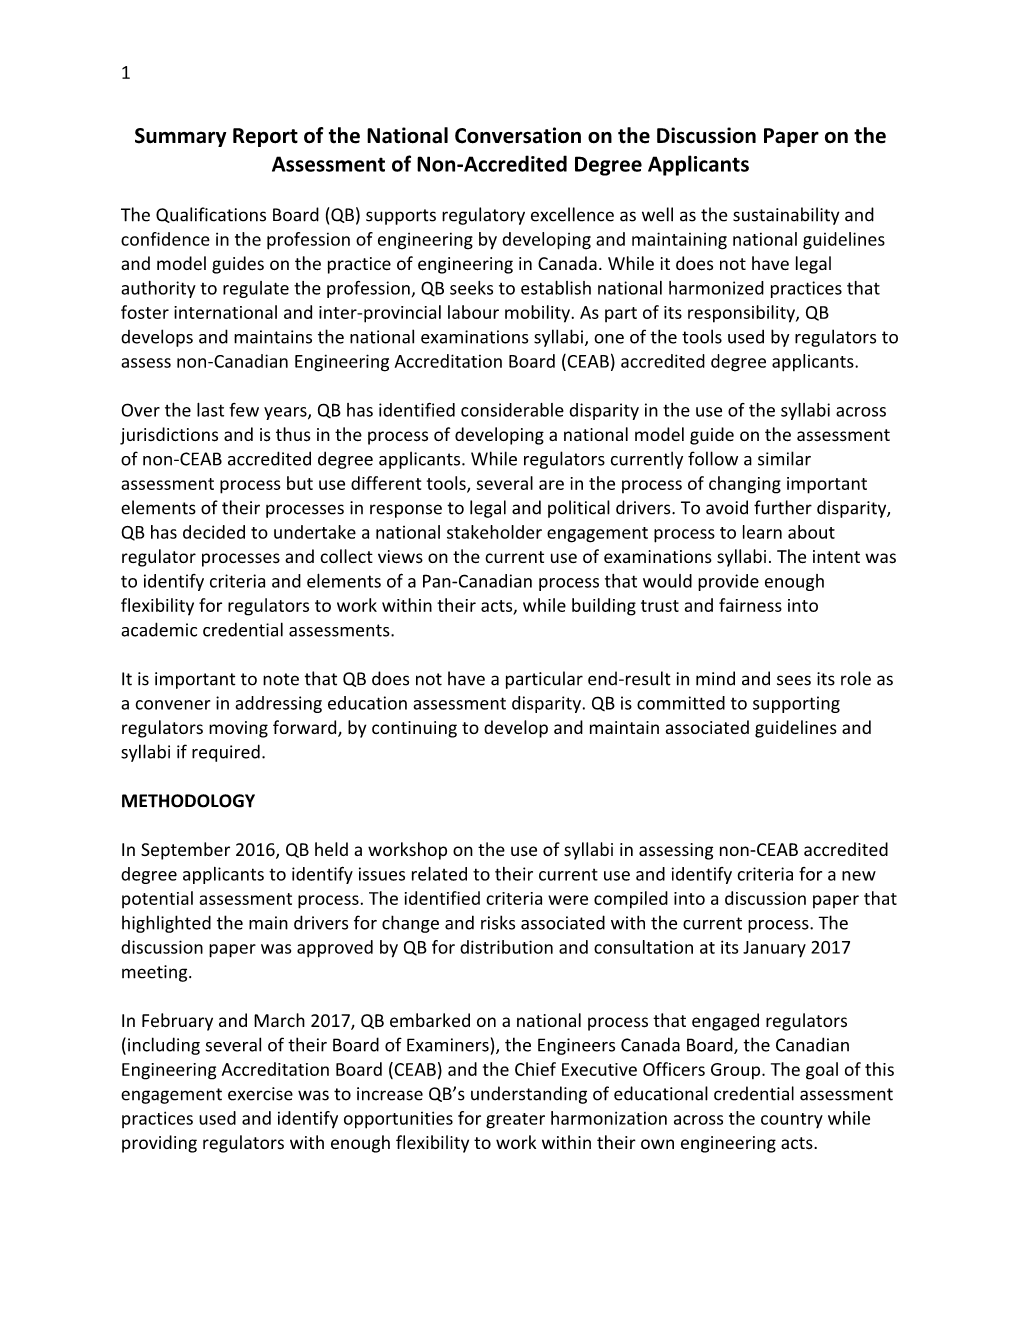 Summary Report of Thenational Conversation on the Discussion Paper on the Assessment Of